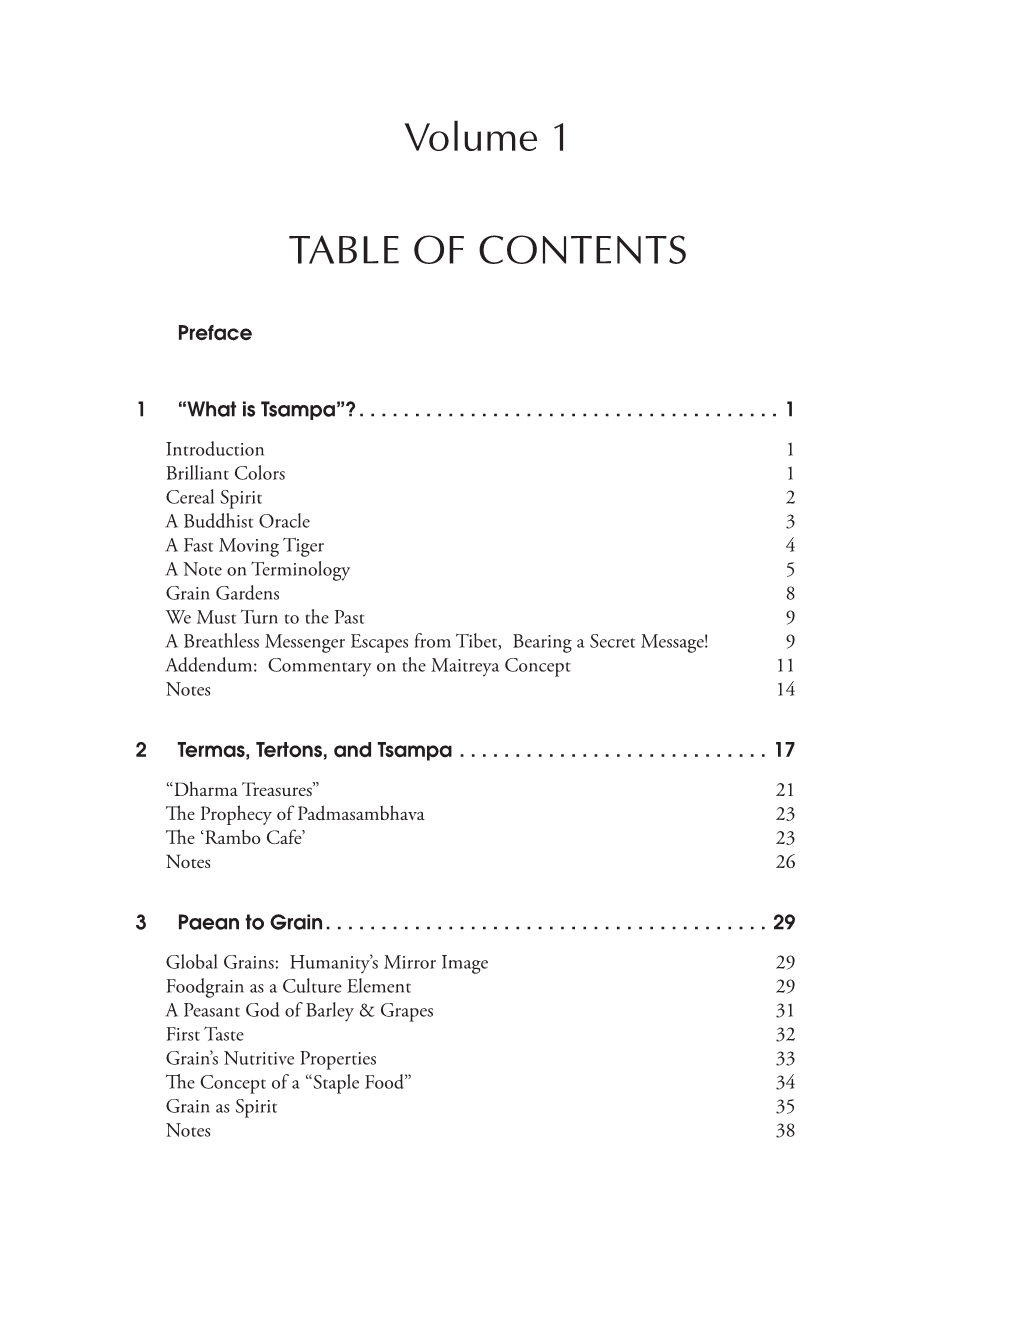 Volume 1 TABLE of CONTENTS